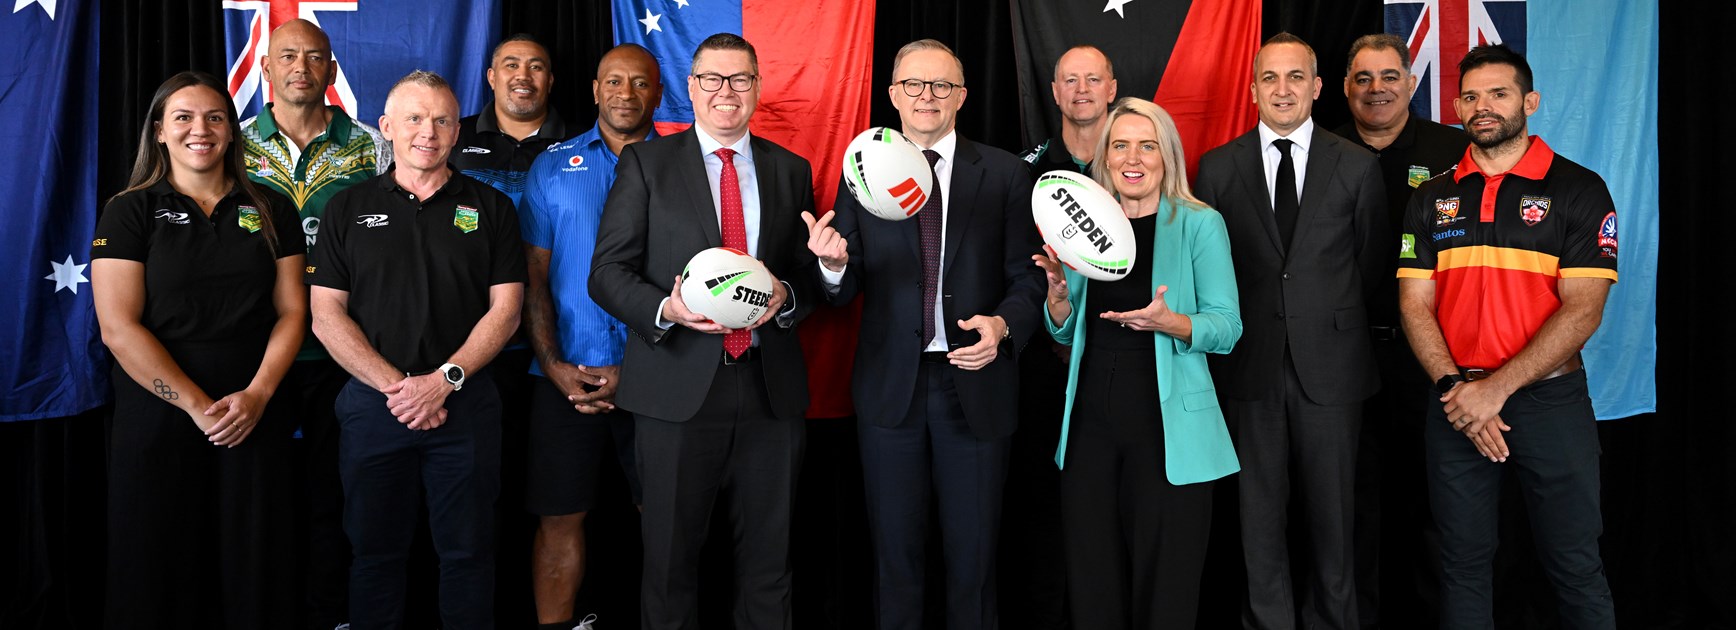 The Pacific Championships will be staged in 2023 and 2024, after the NRL and NRLW Premiership seasons.